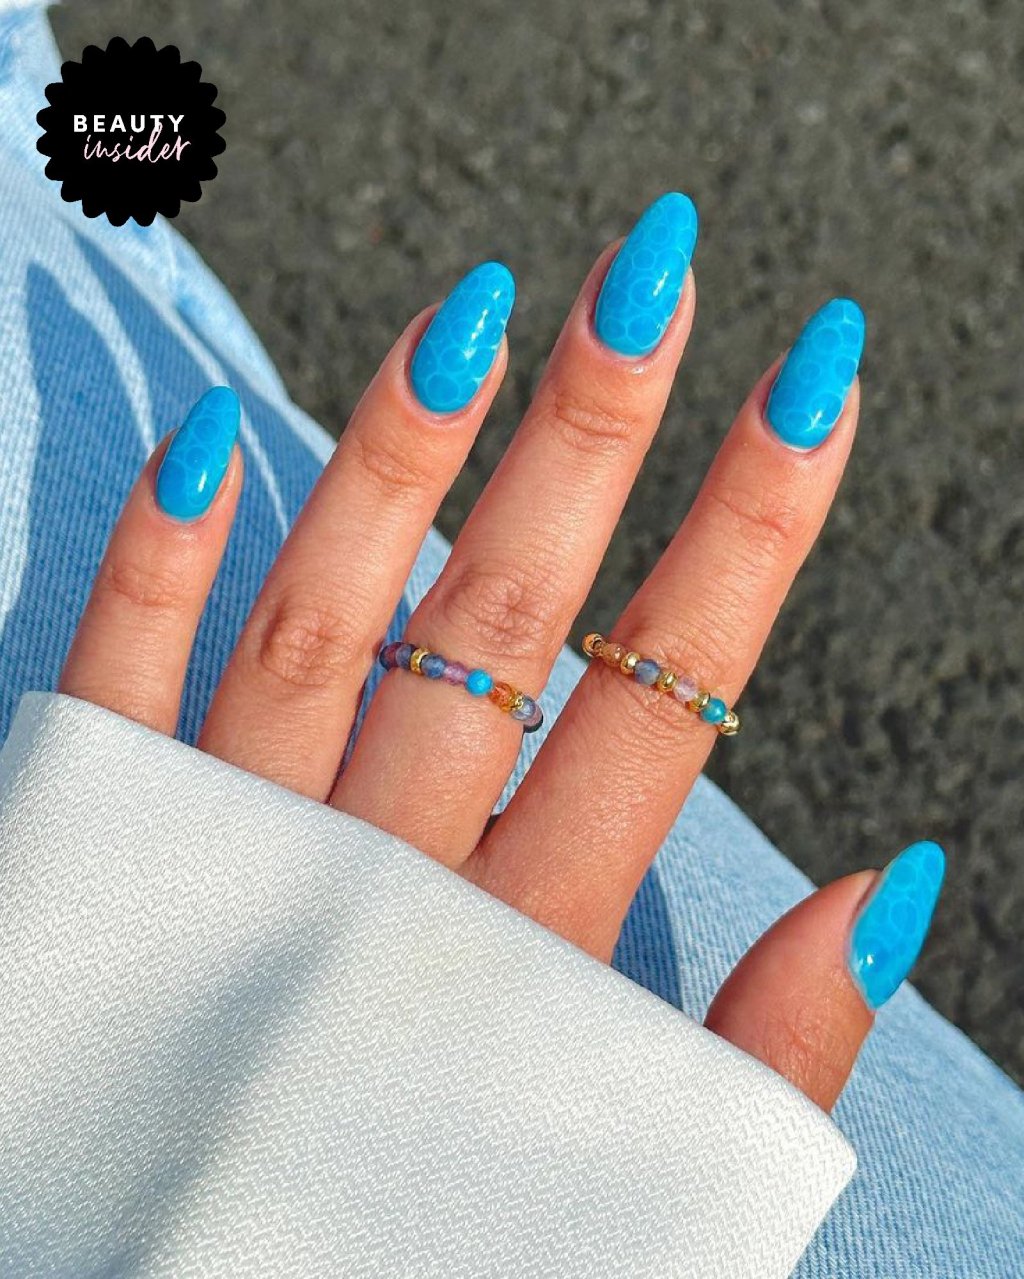 6 Instagram Nail Trends You Need To Know For Summer 2023